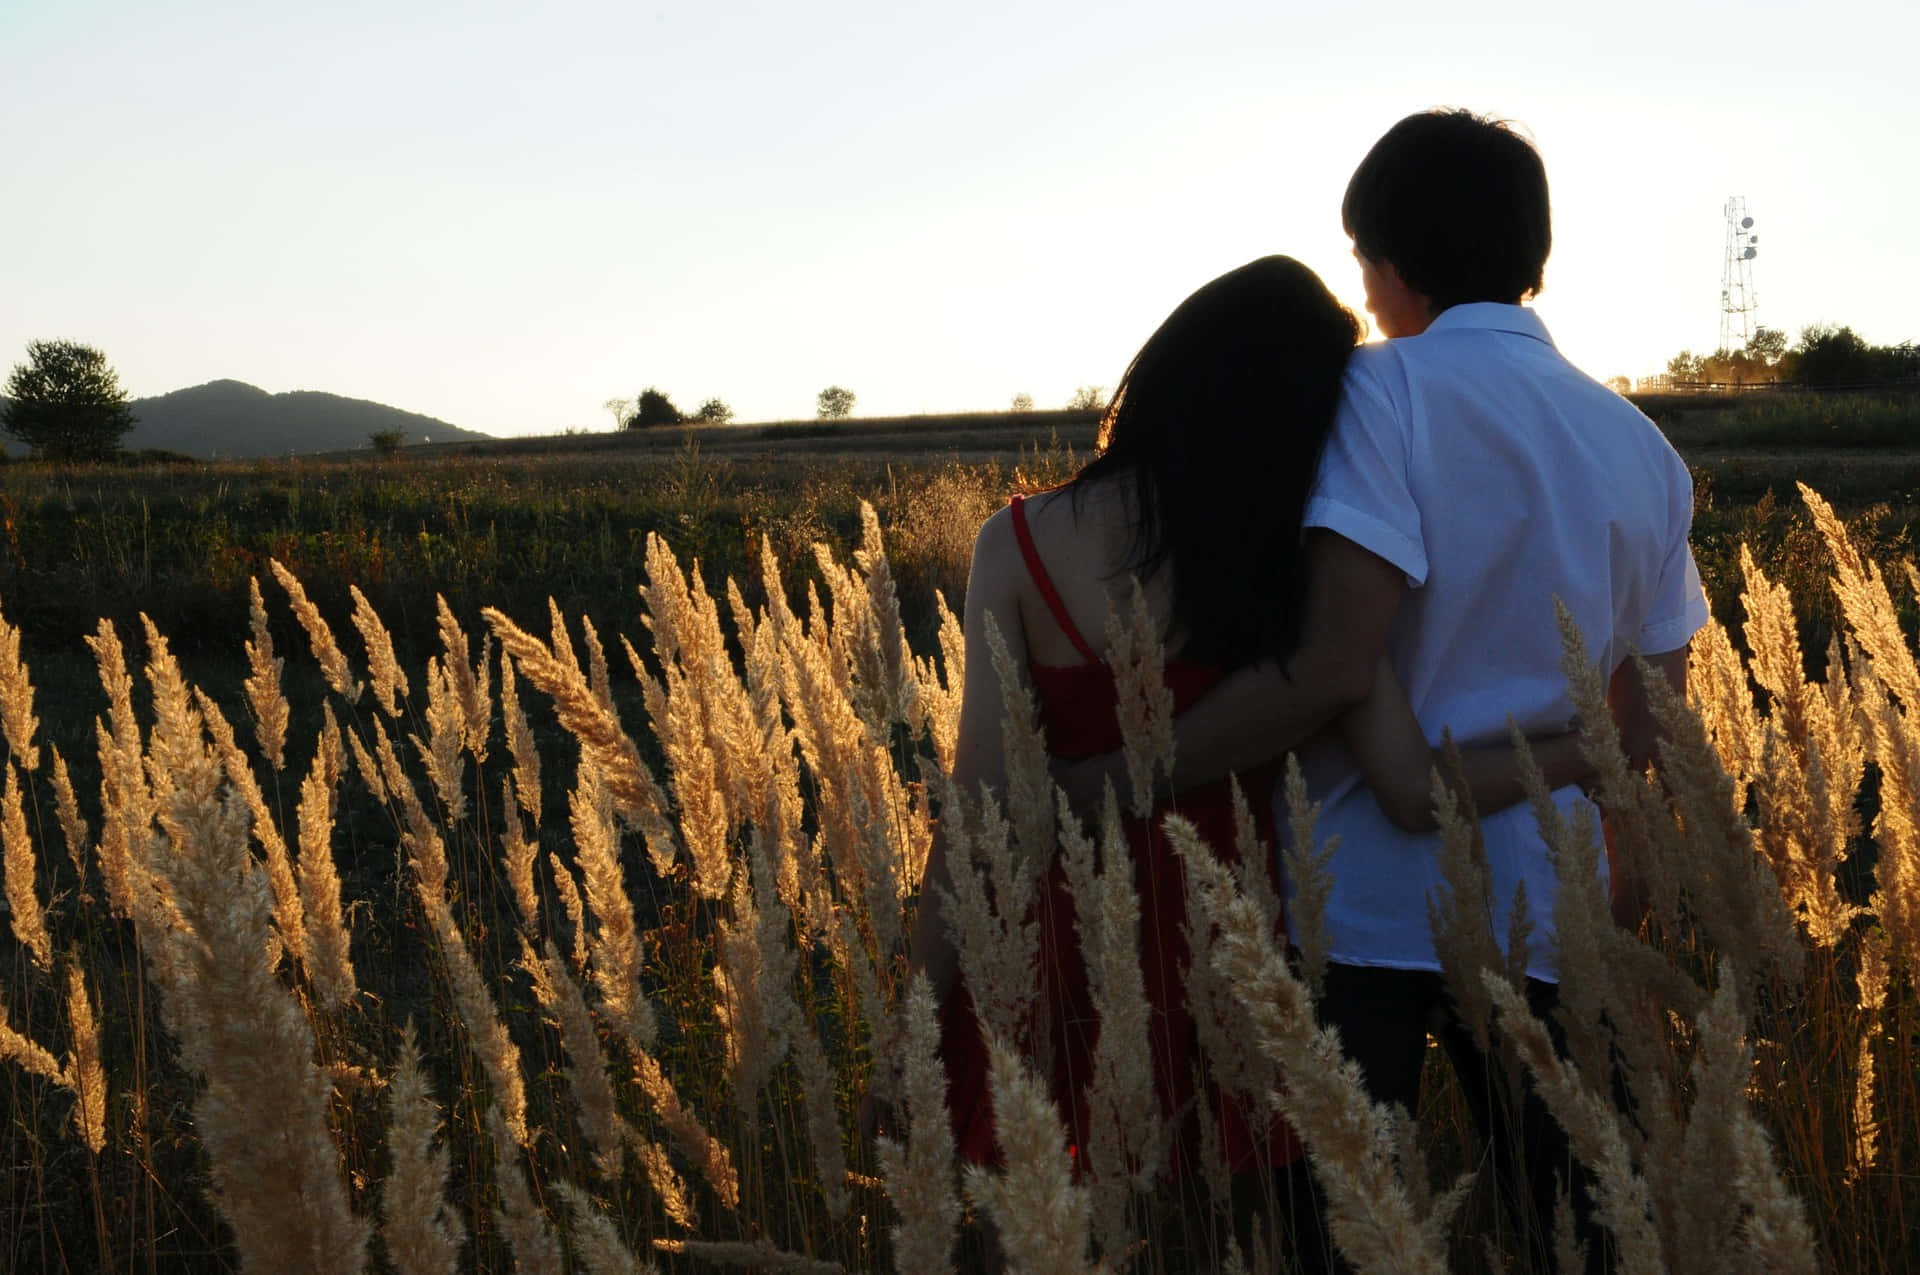 Couple On Wheat Field Relationship Picture